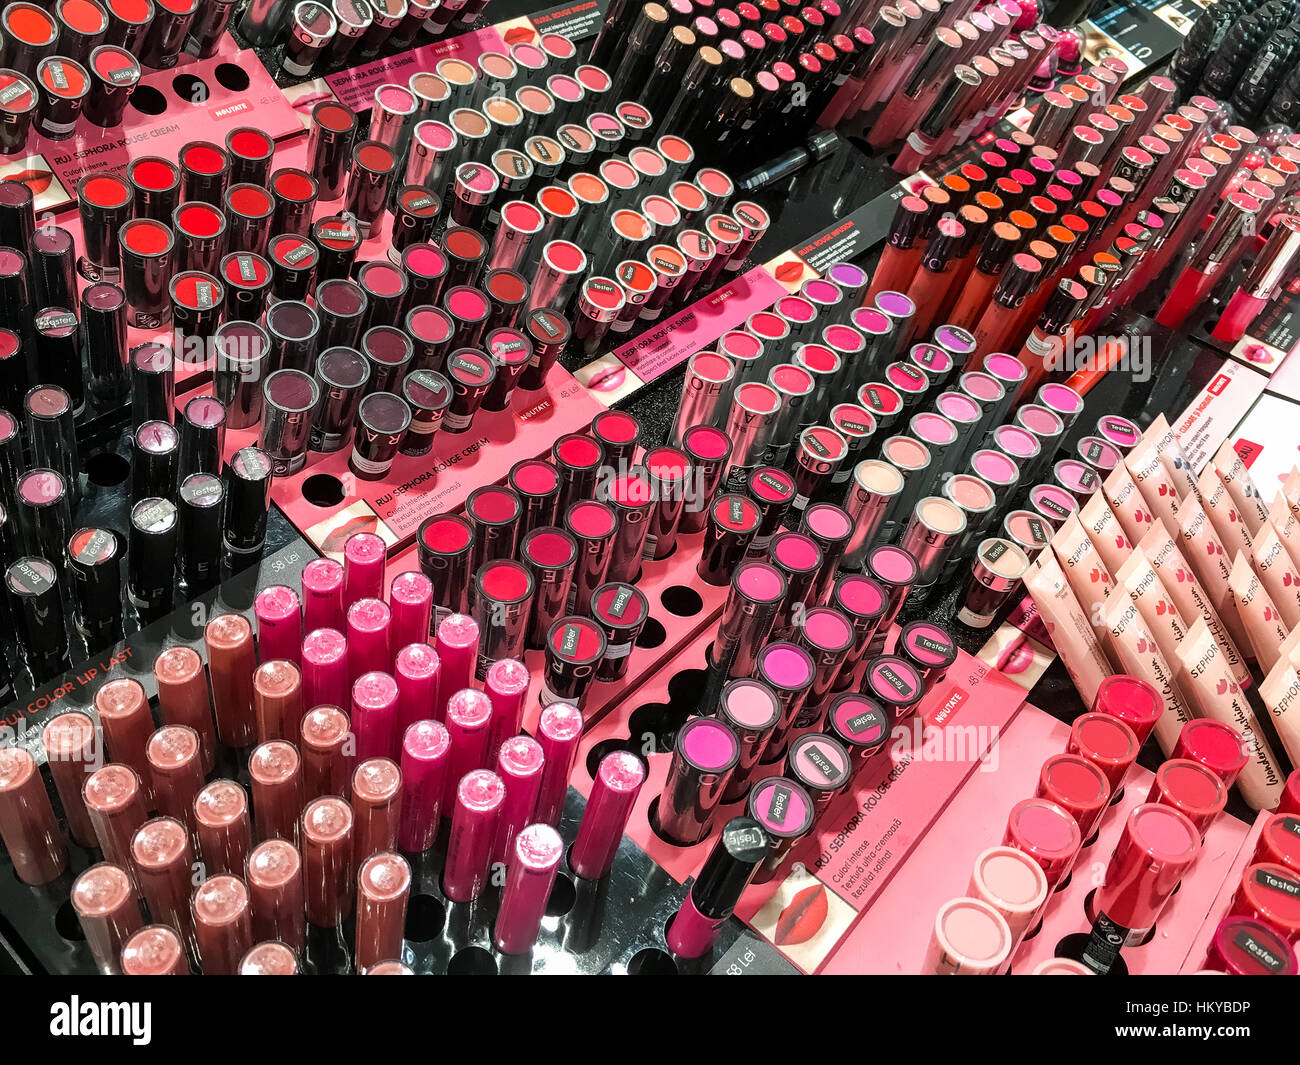 BUCHAREST, ROMANIA - MAY 30, 2016: Cosmetic Products For Sale In Fashion Beauty Shop Display. Stock Photo